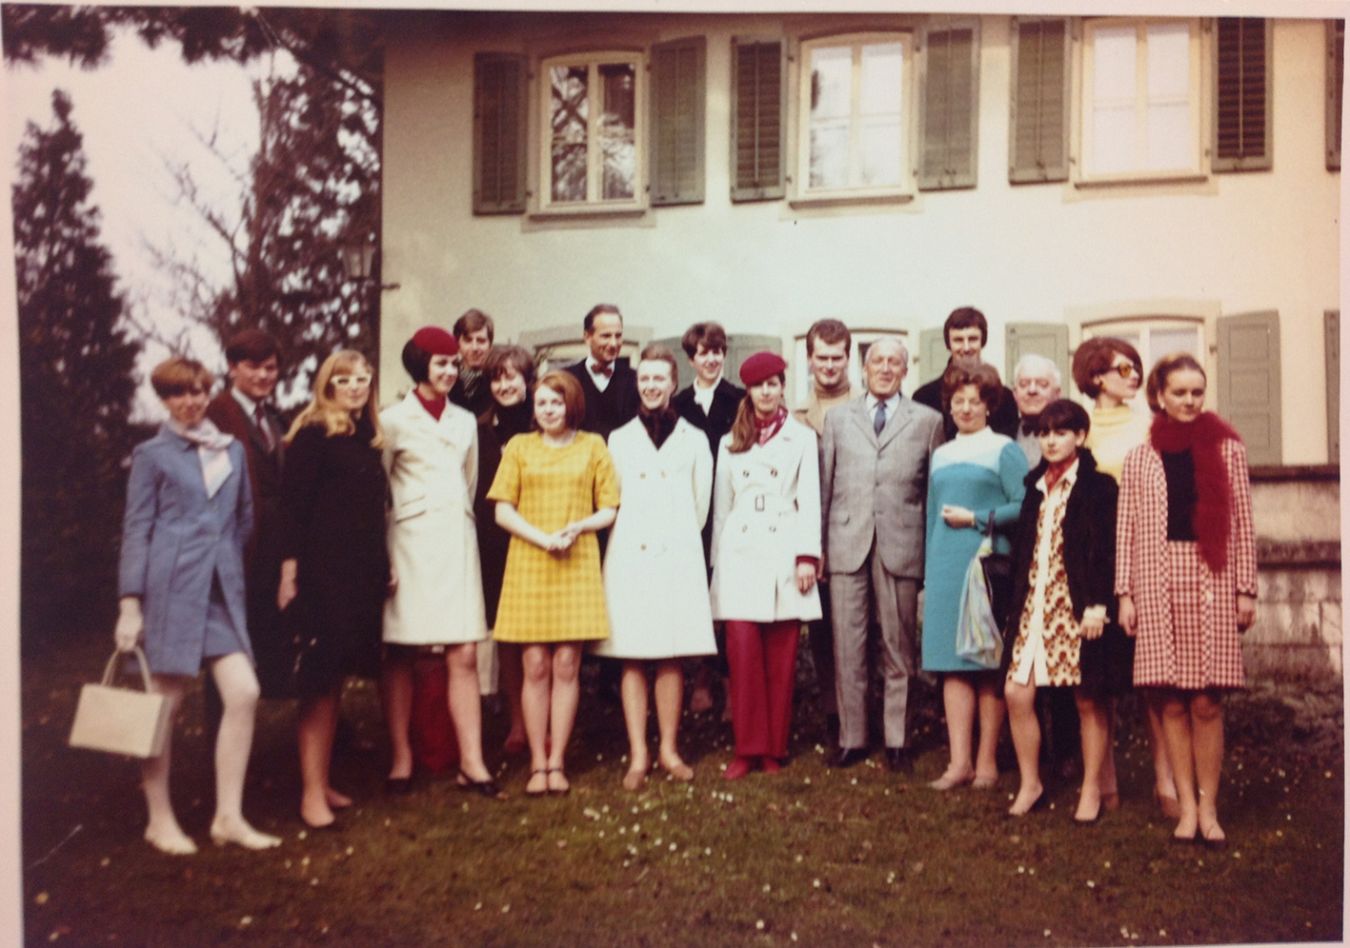 Kingston College of Art's Head of Fashion, Daphne Brooker, centre front, poses with her students during a visit to Bally's Shoe Factory Museum in Schoenwerd, Switzerland, in March 1966. Photo: Kingston University Special Collections.